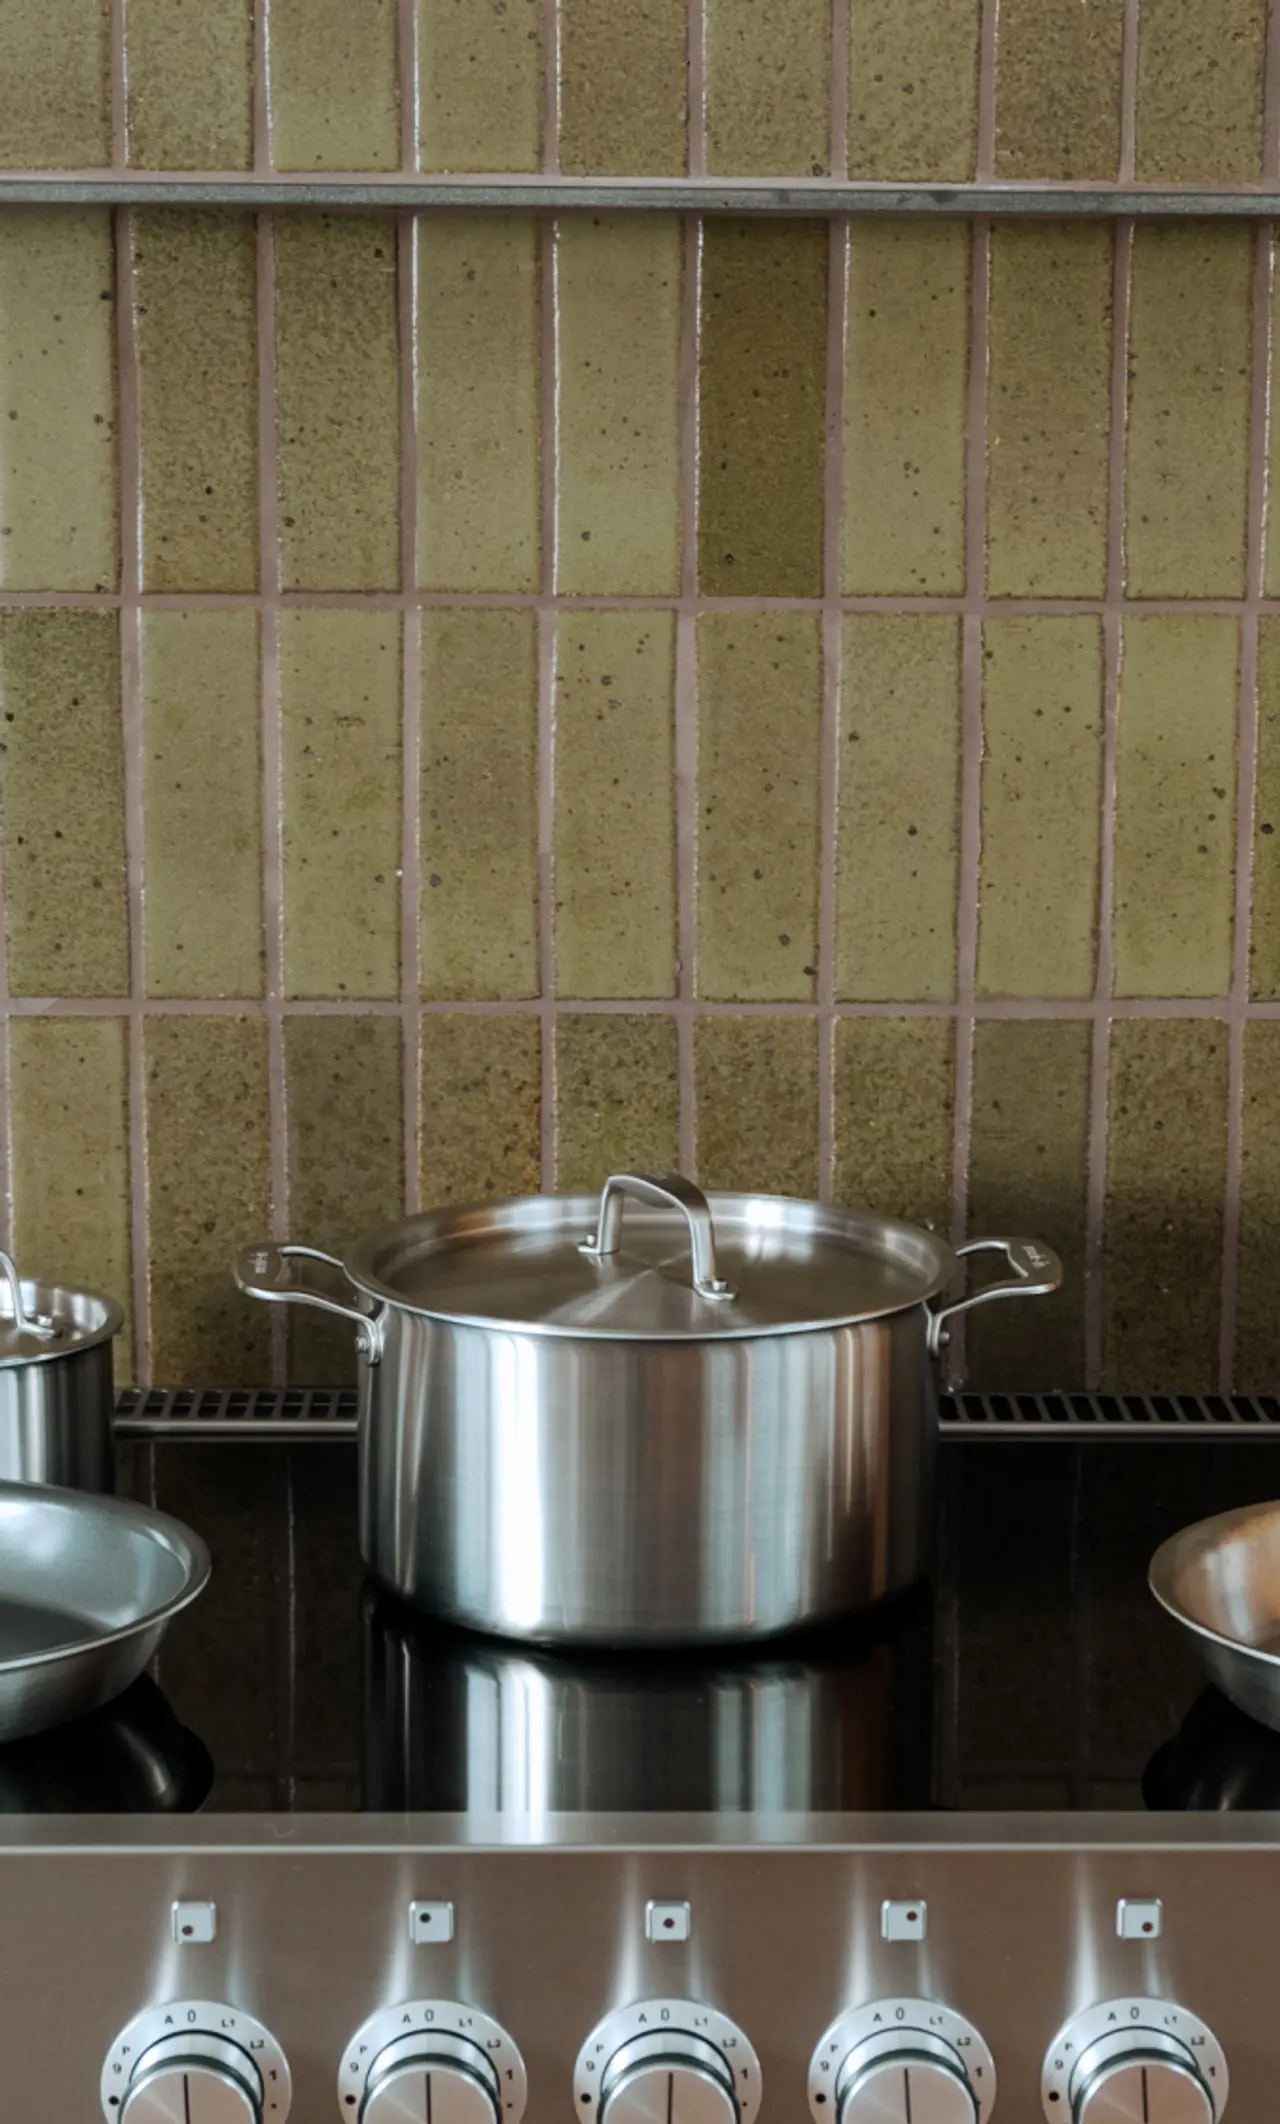 A stainless steel pot sits on a stove with control knobs in the foreground and a tiled wall behind.